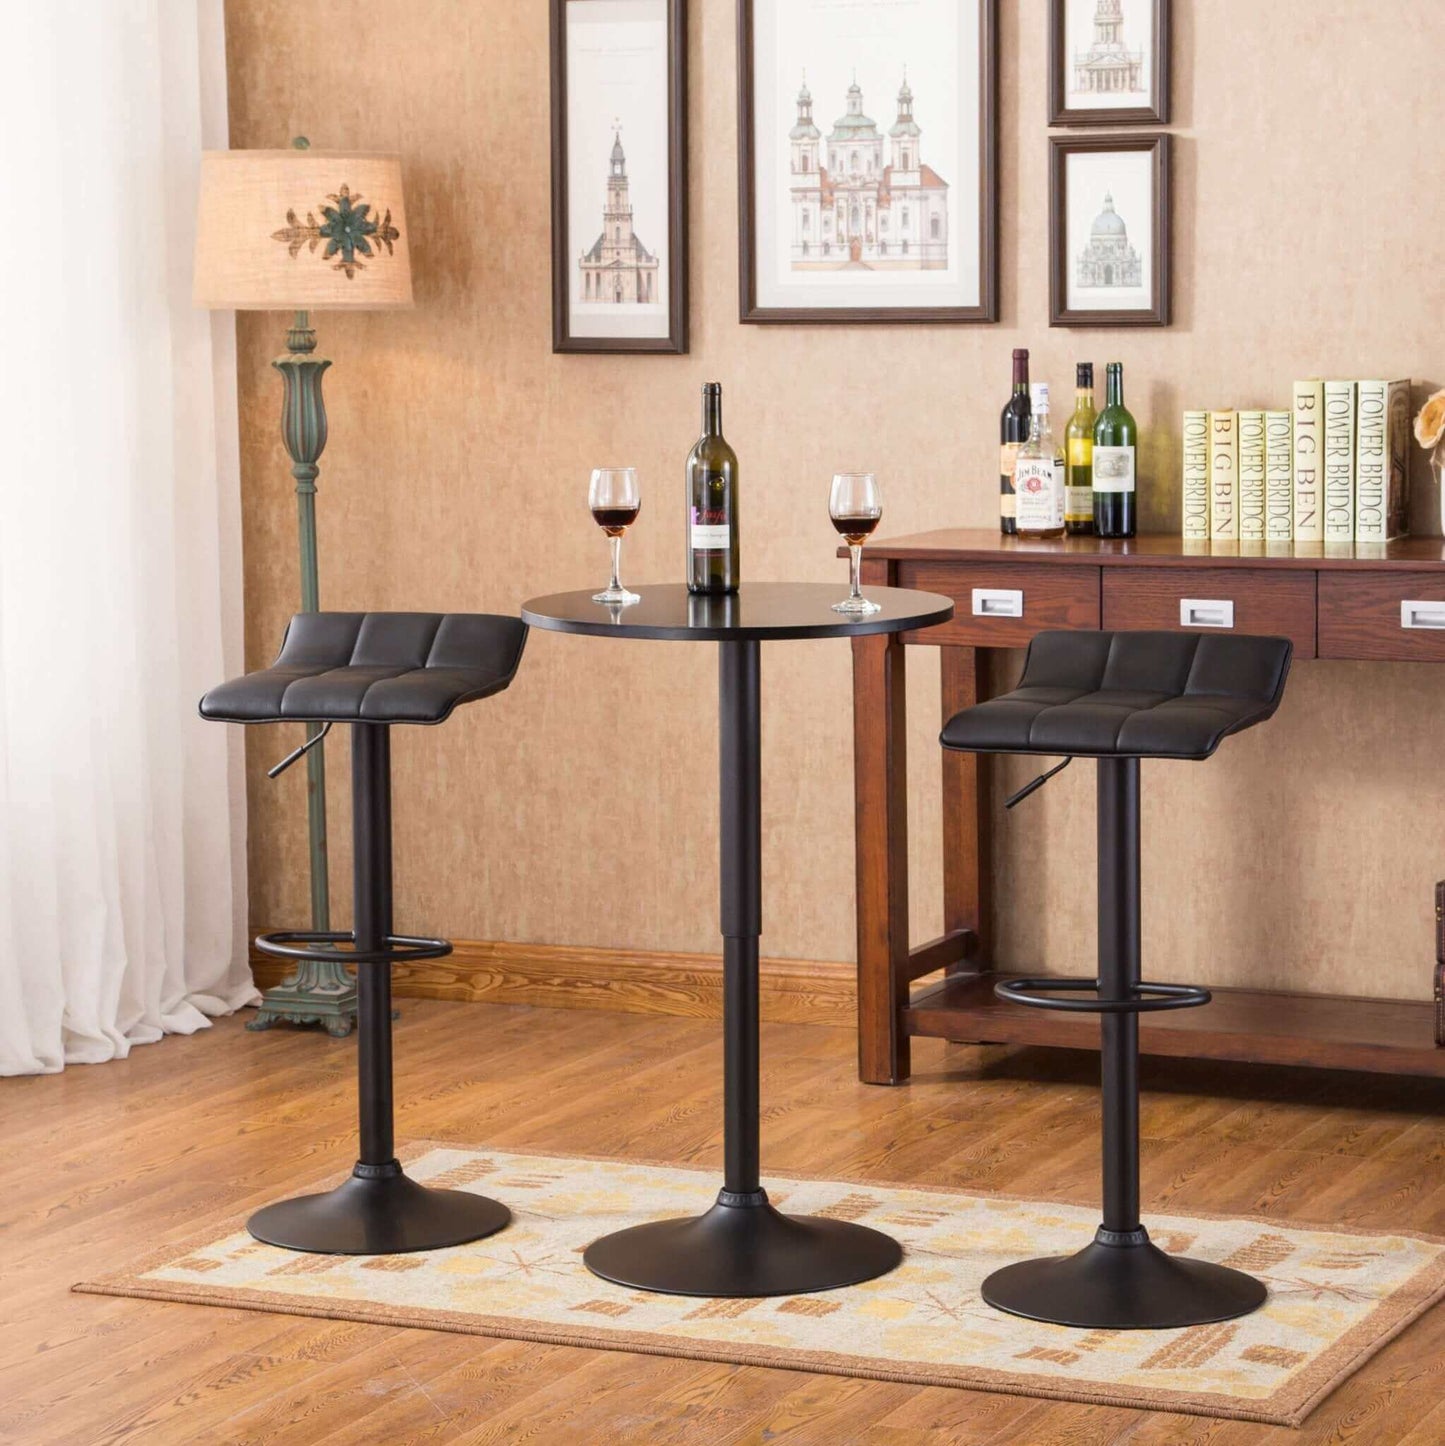 Belham black adjustable height bar table with two swivel stools in dining room setting